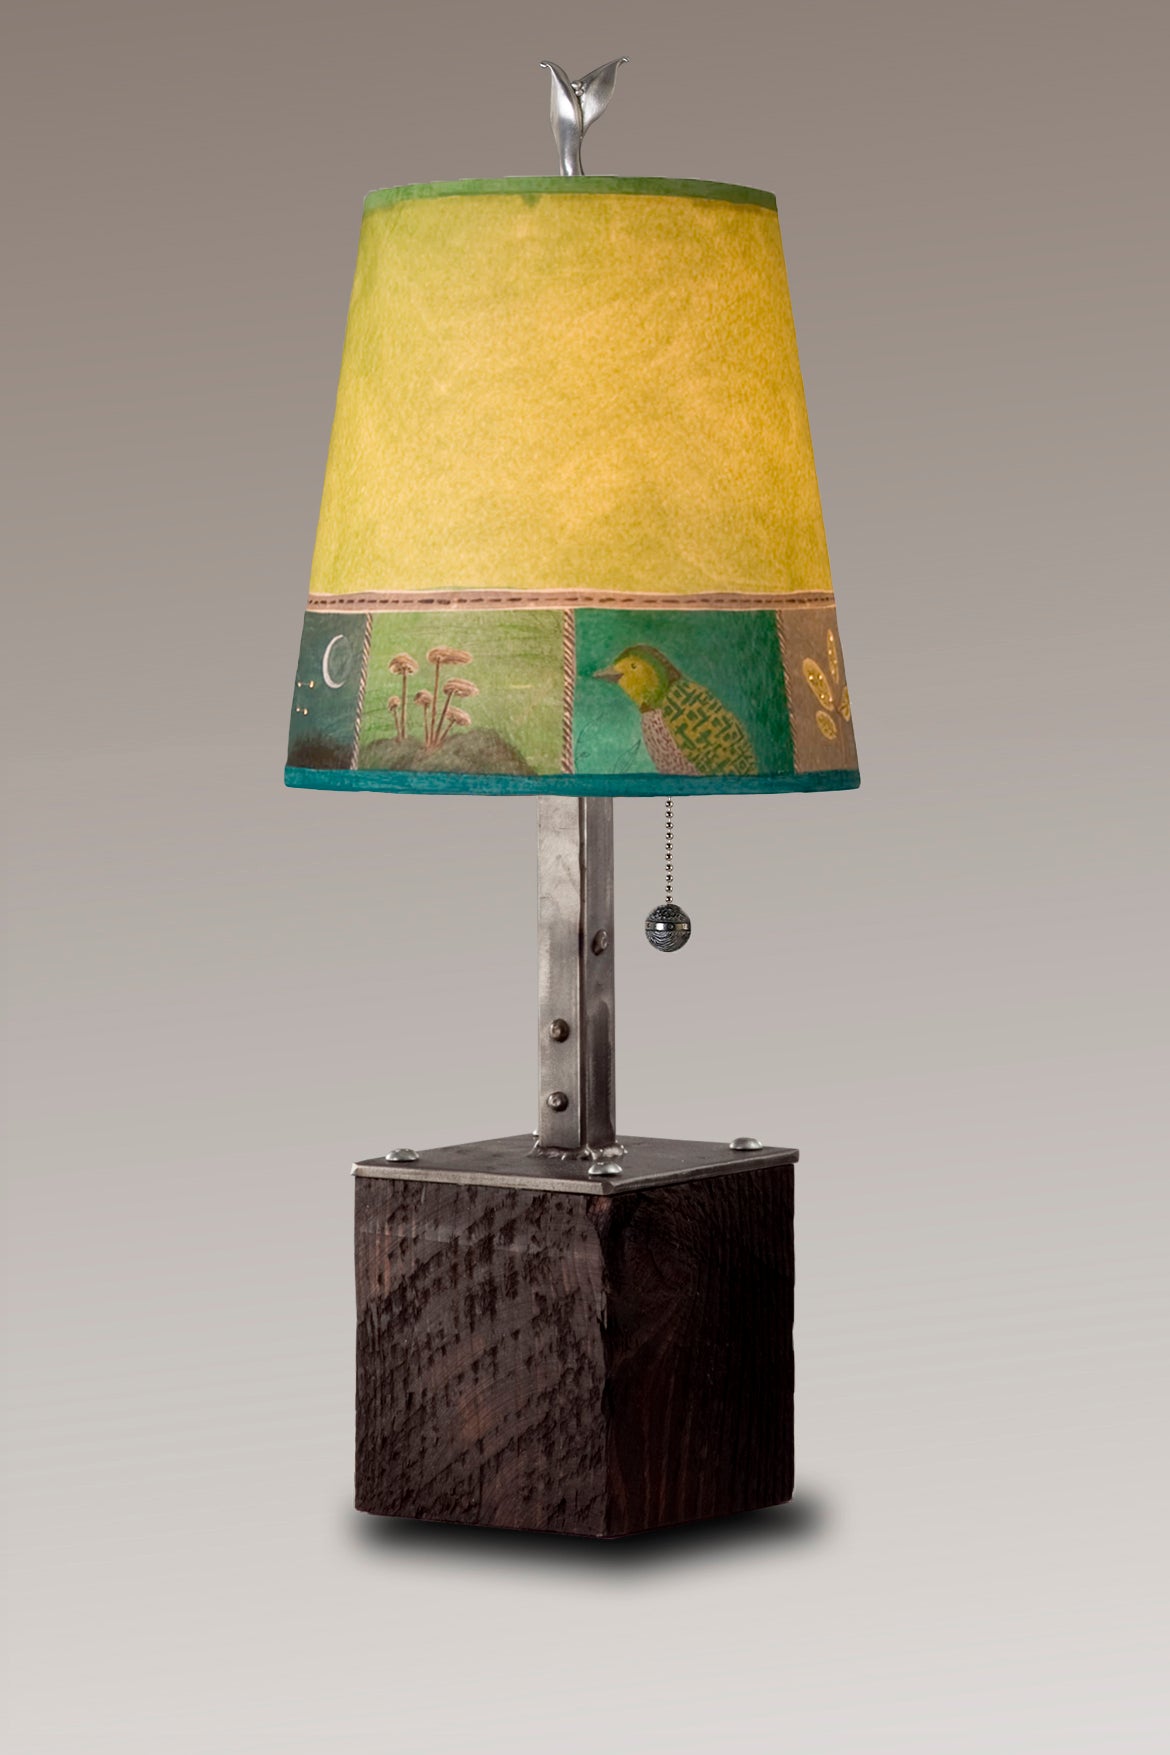 Janna Ugone & Co Table Lamps Steel Table Lamp on Reclaimed Wood with Small Drum Shade in Woodland Trails in Leaf